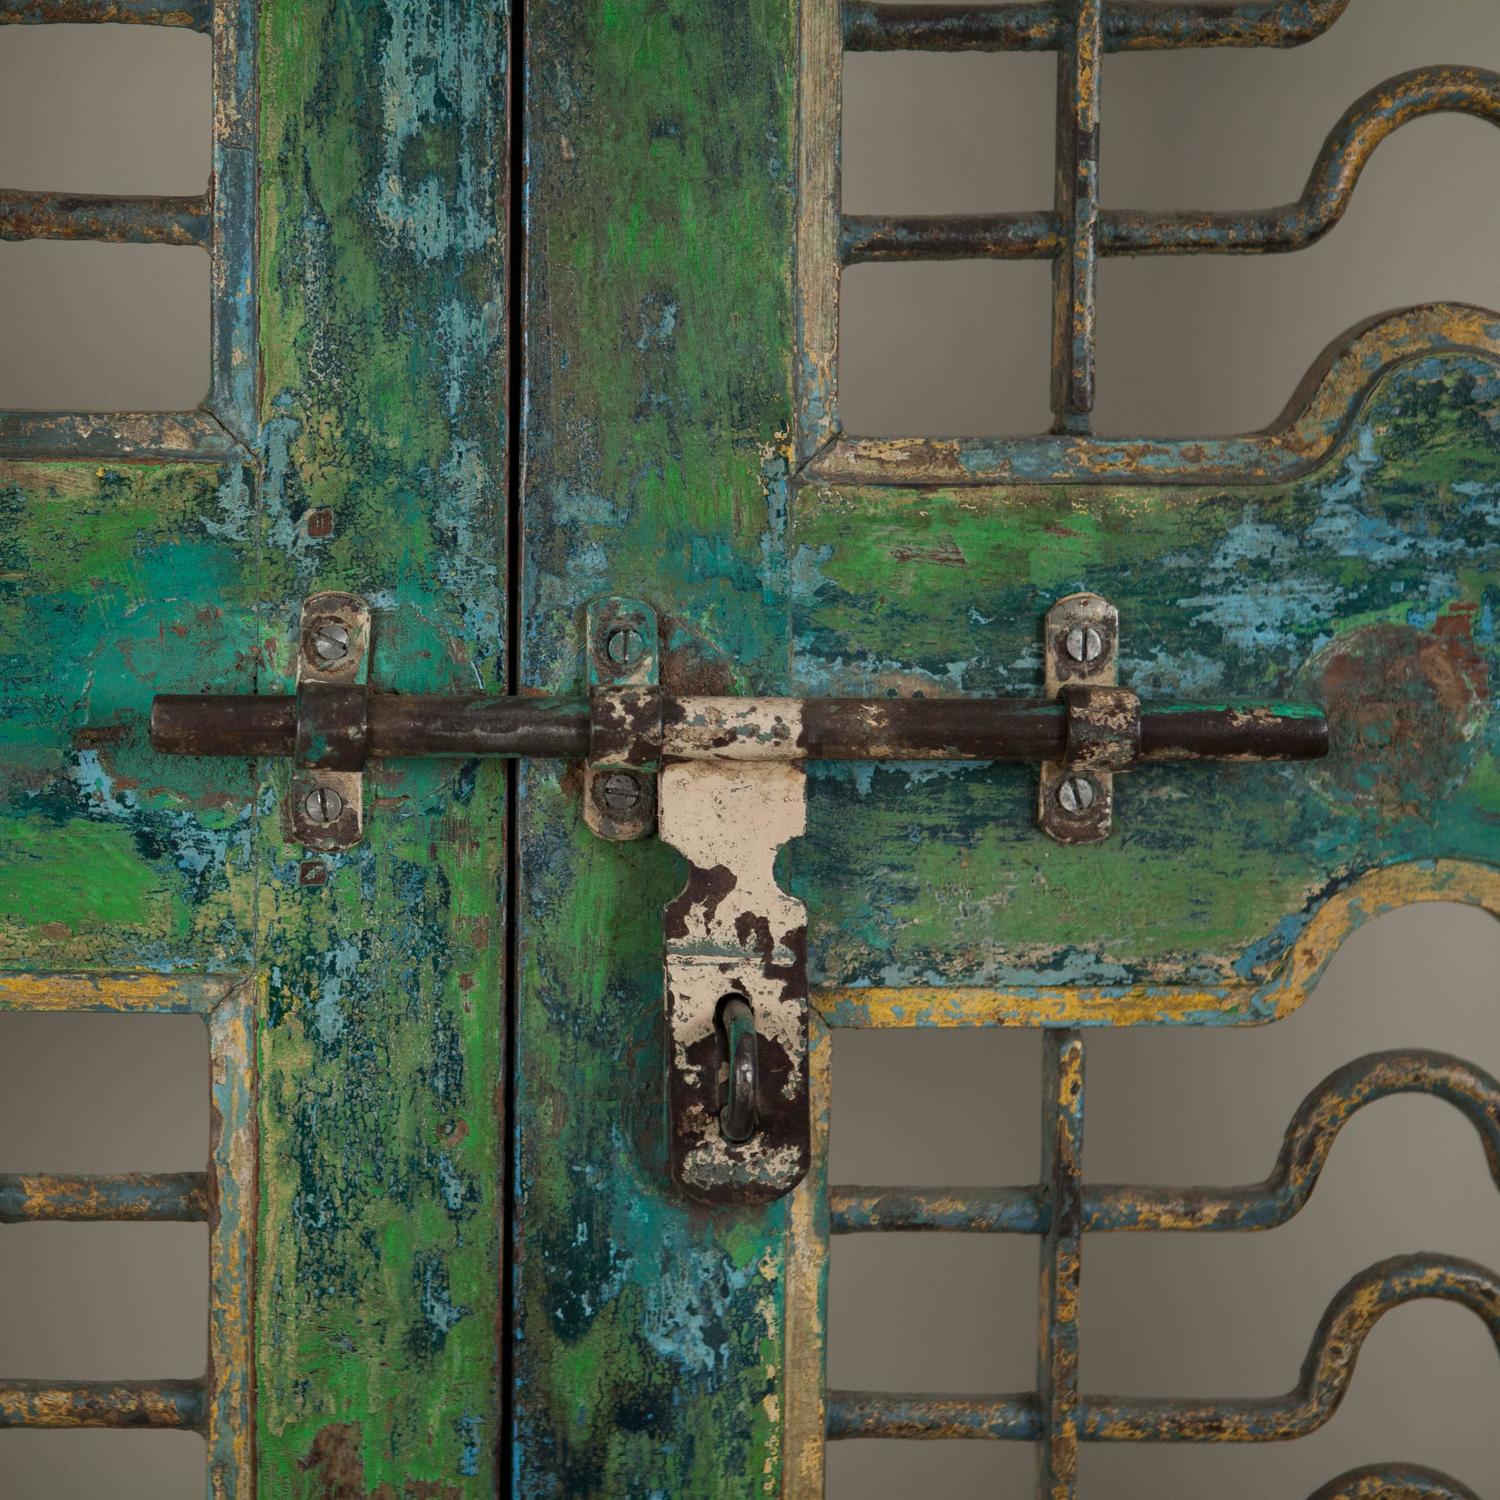 Teak and Iron Door from India For Sale at 1stdibs